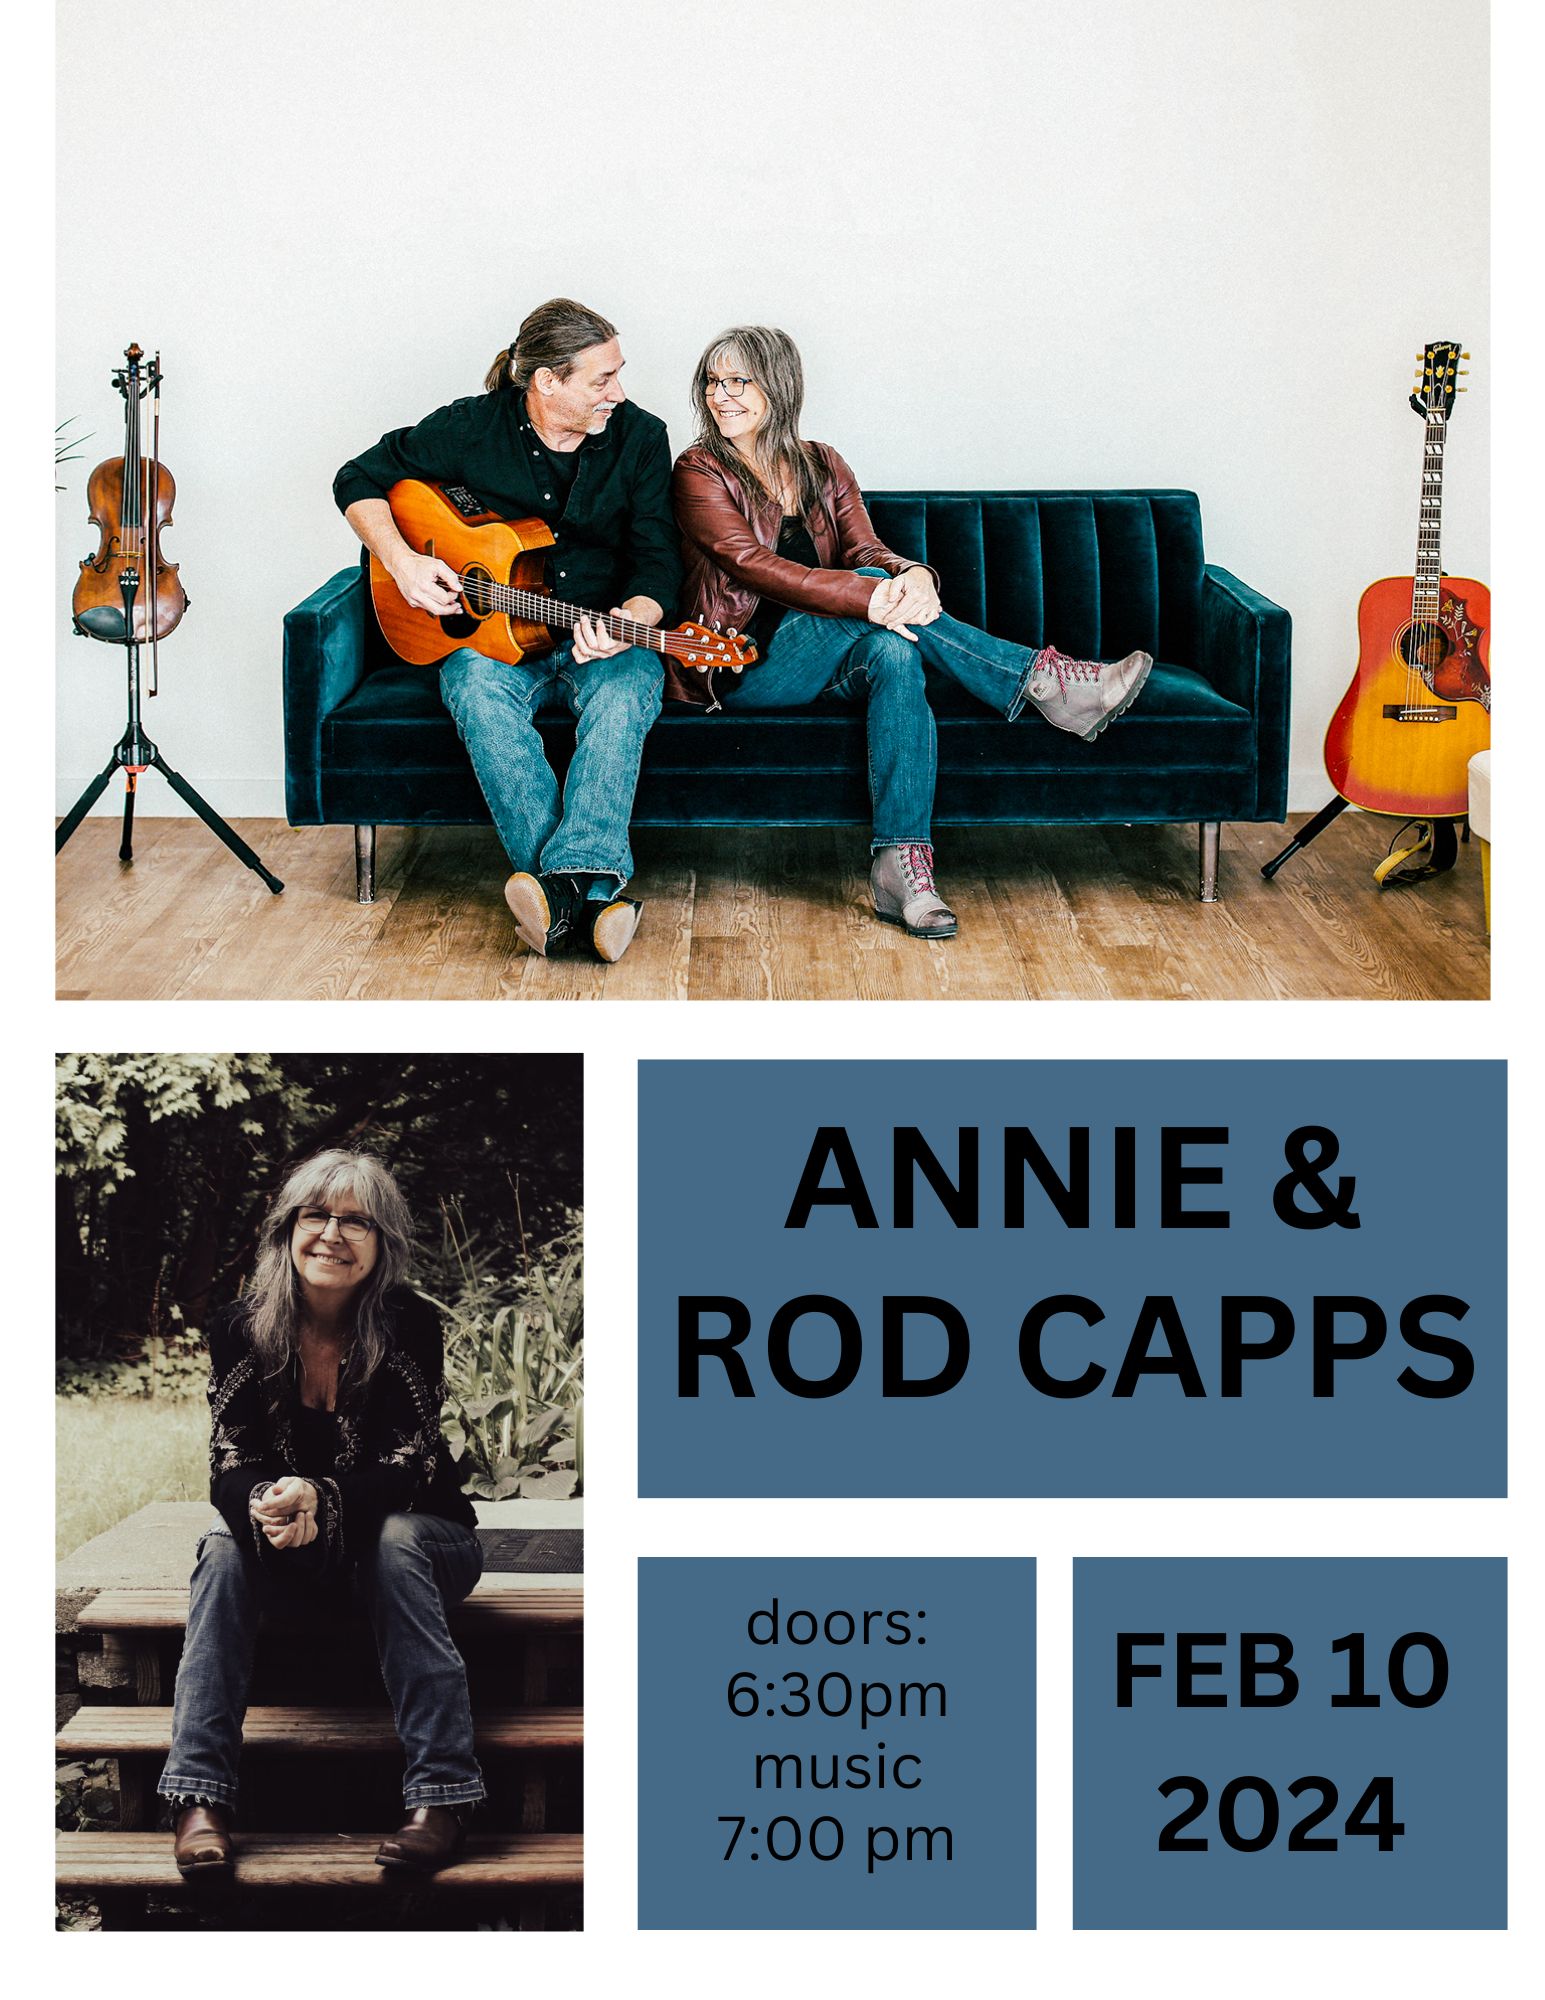 Annie & Rod Capps